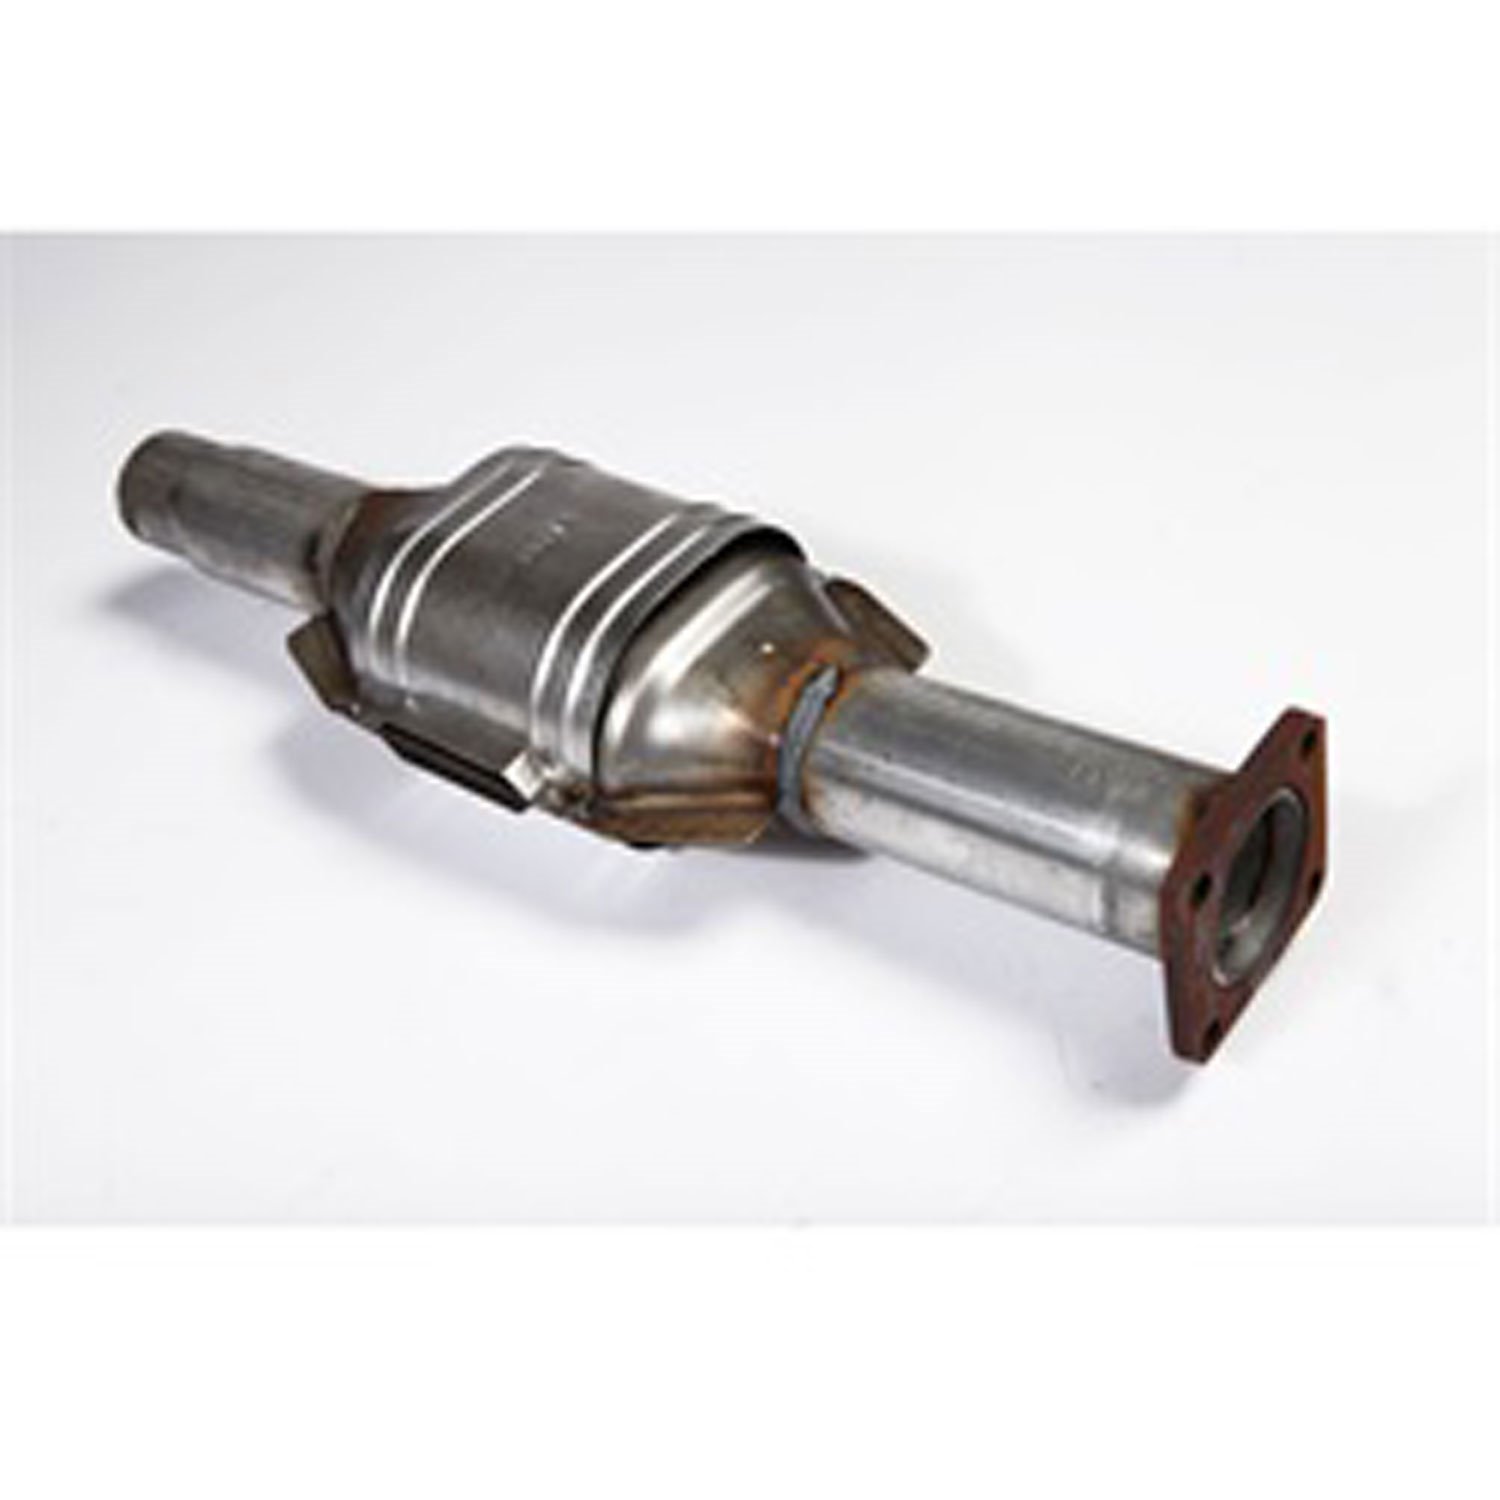 This catalytic converter from Omix-ADA fits 87-92 Jeep Wrangler with a 2.5 liter engine and 91-92 Ch